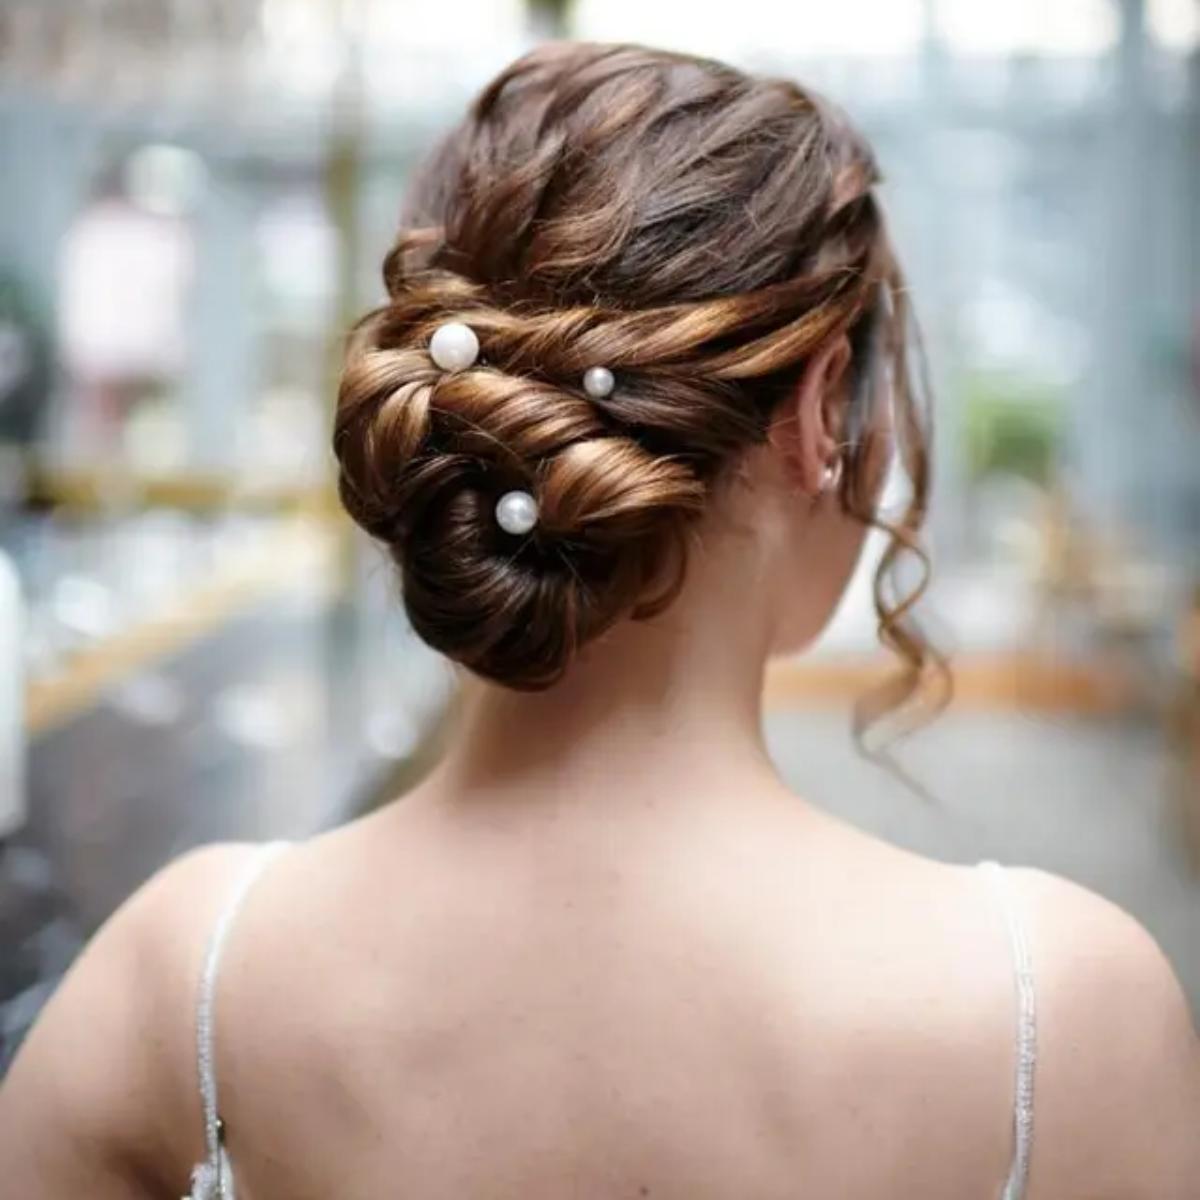 30 Effortless Side Hairstyles for Your Wedding